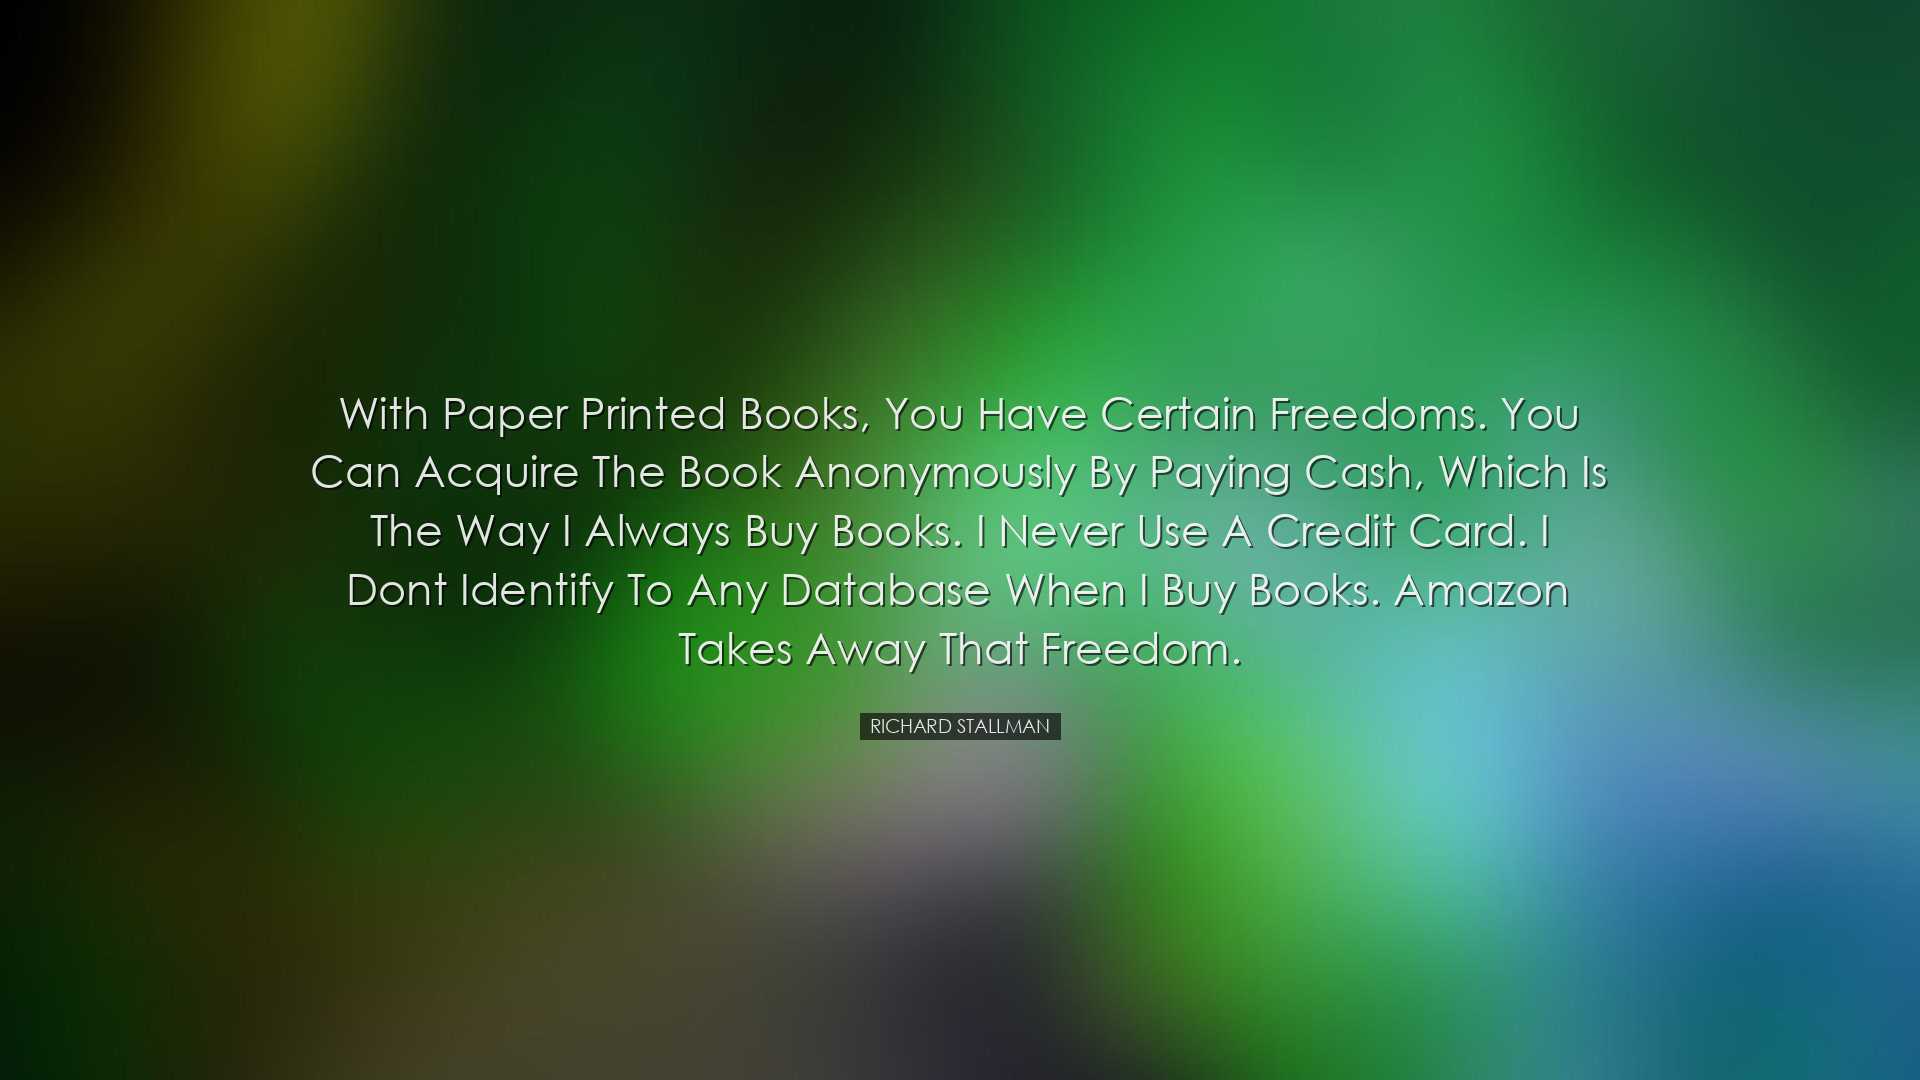 With paper printed books, you have certain freedoms. You can acqui